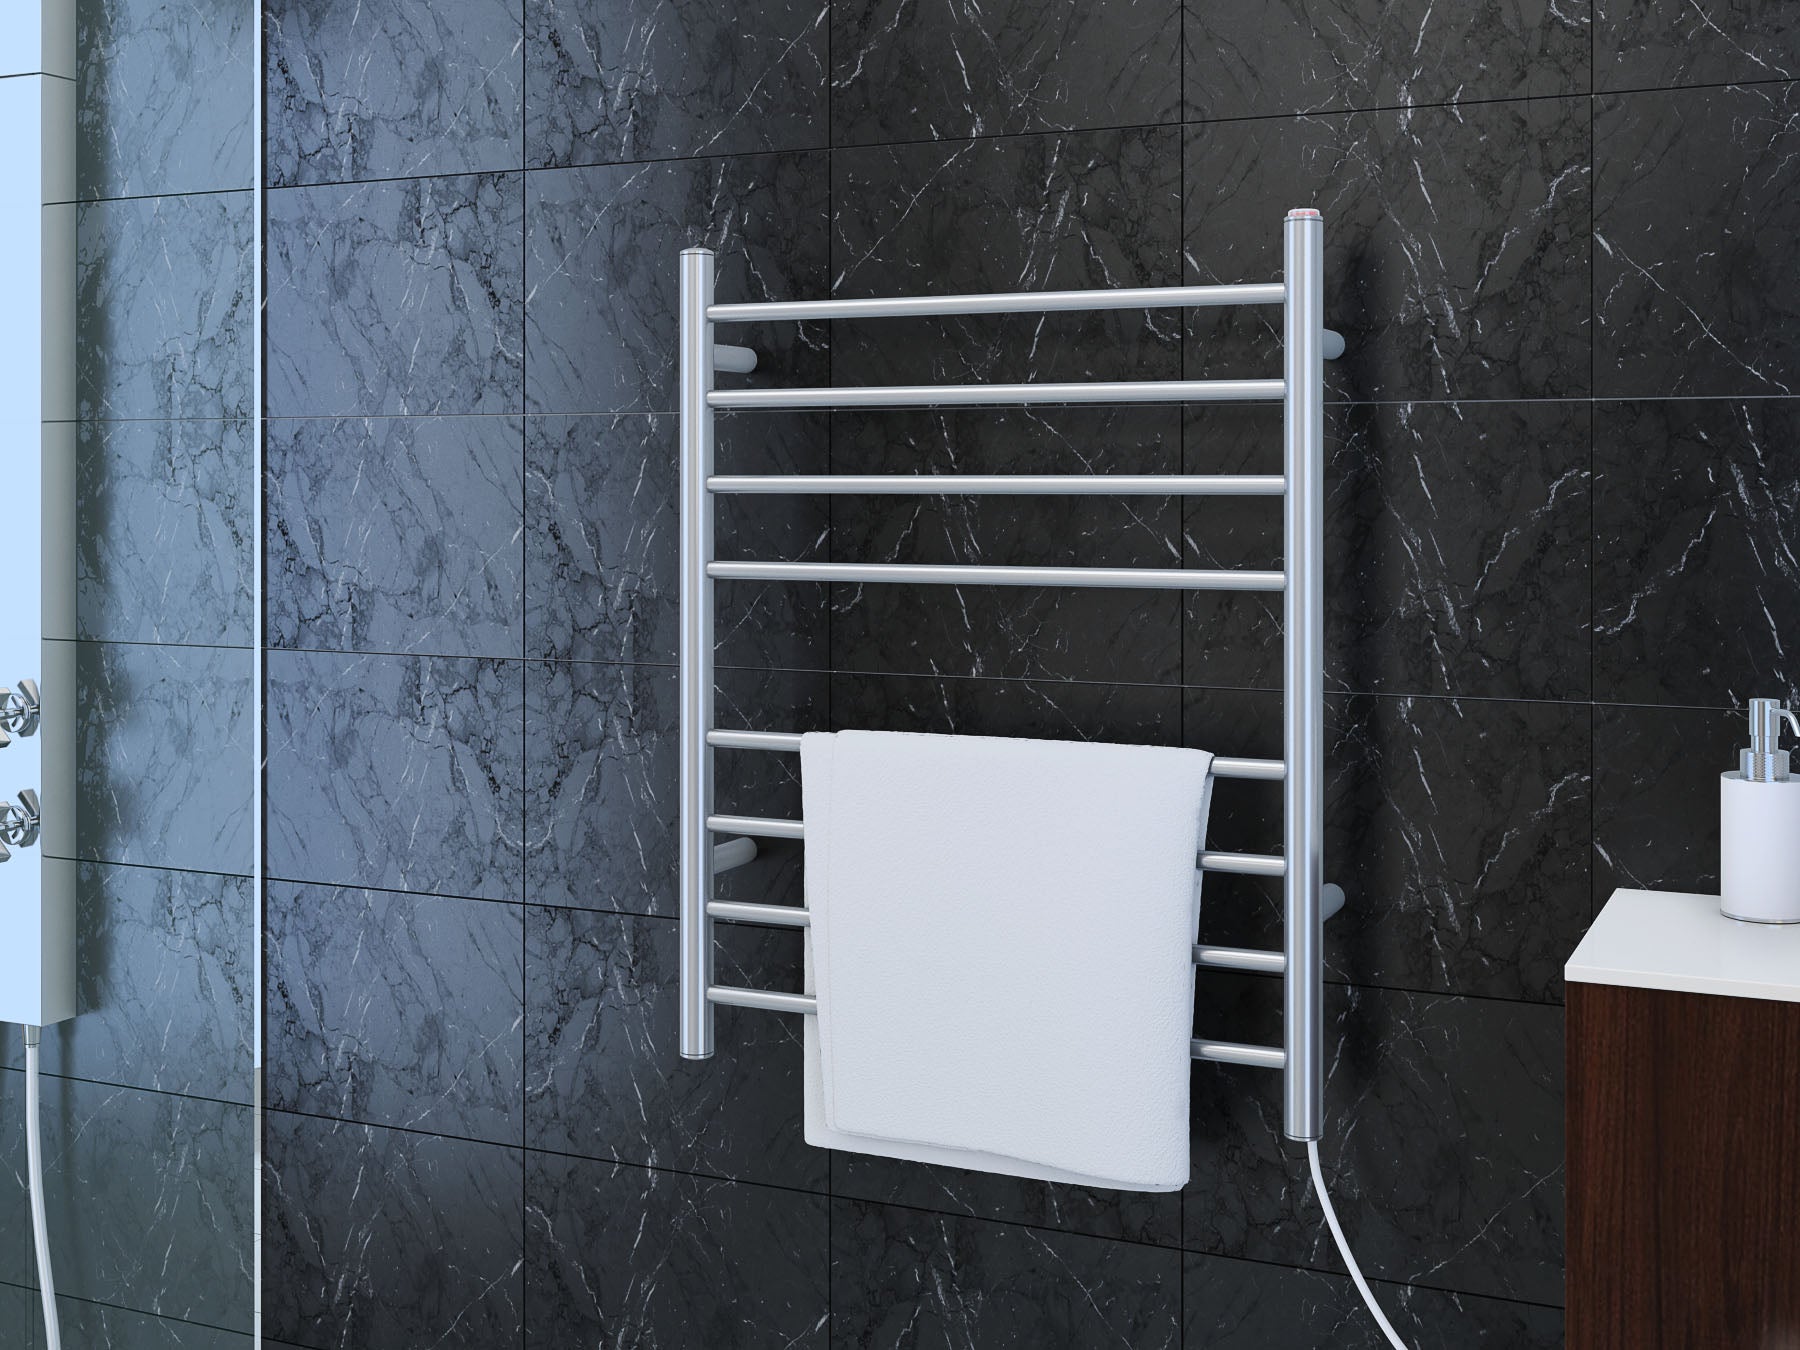 Prestige Dual 8-Bar Hardwired and Plug-in Towel Warmer in Polished Stainless Steel